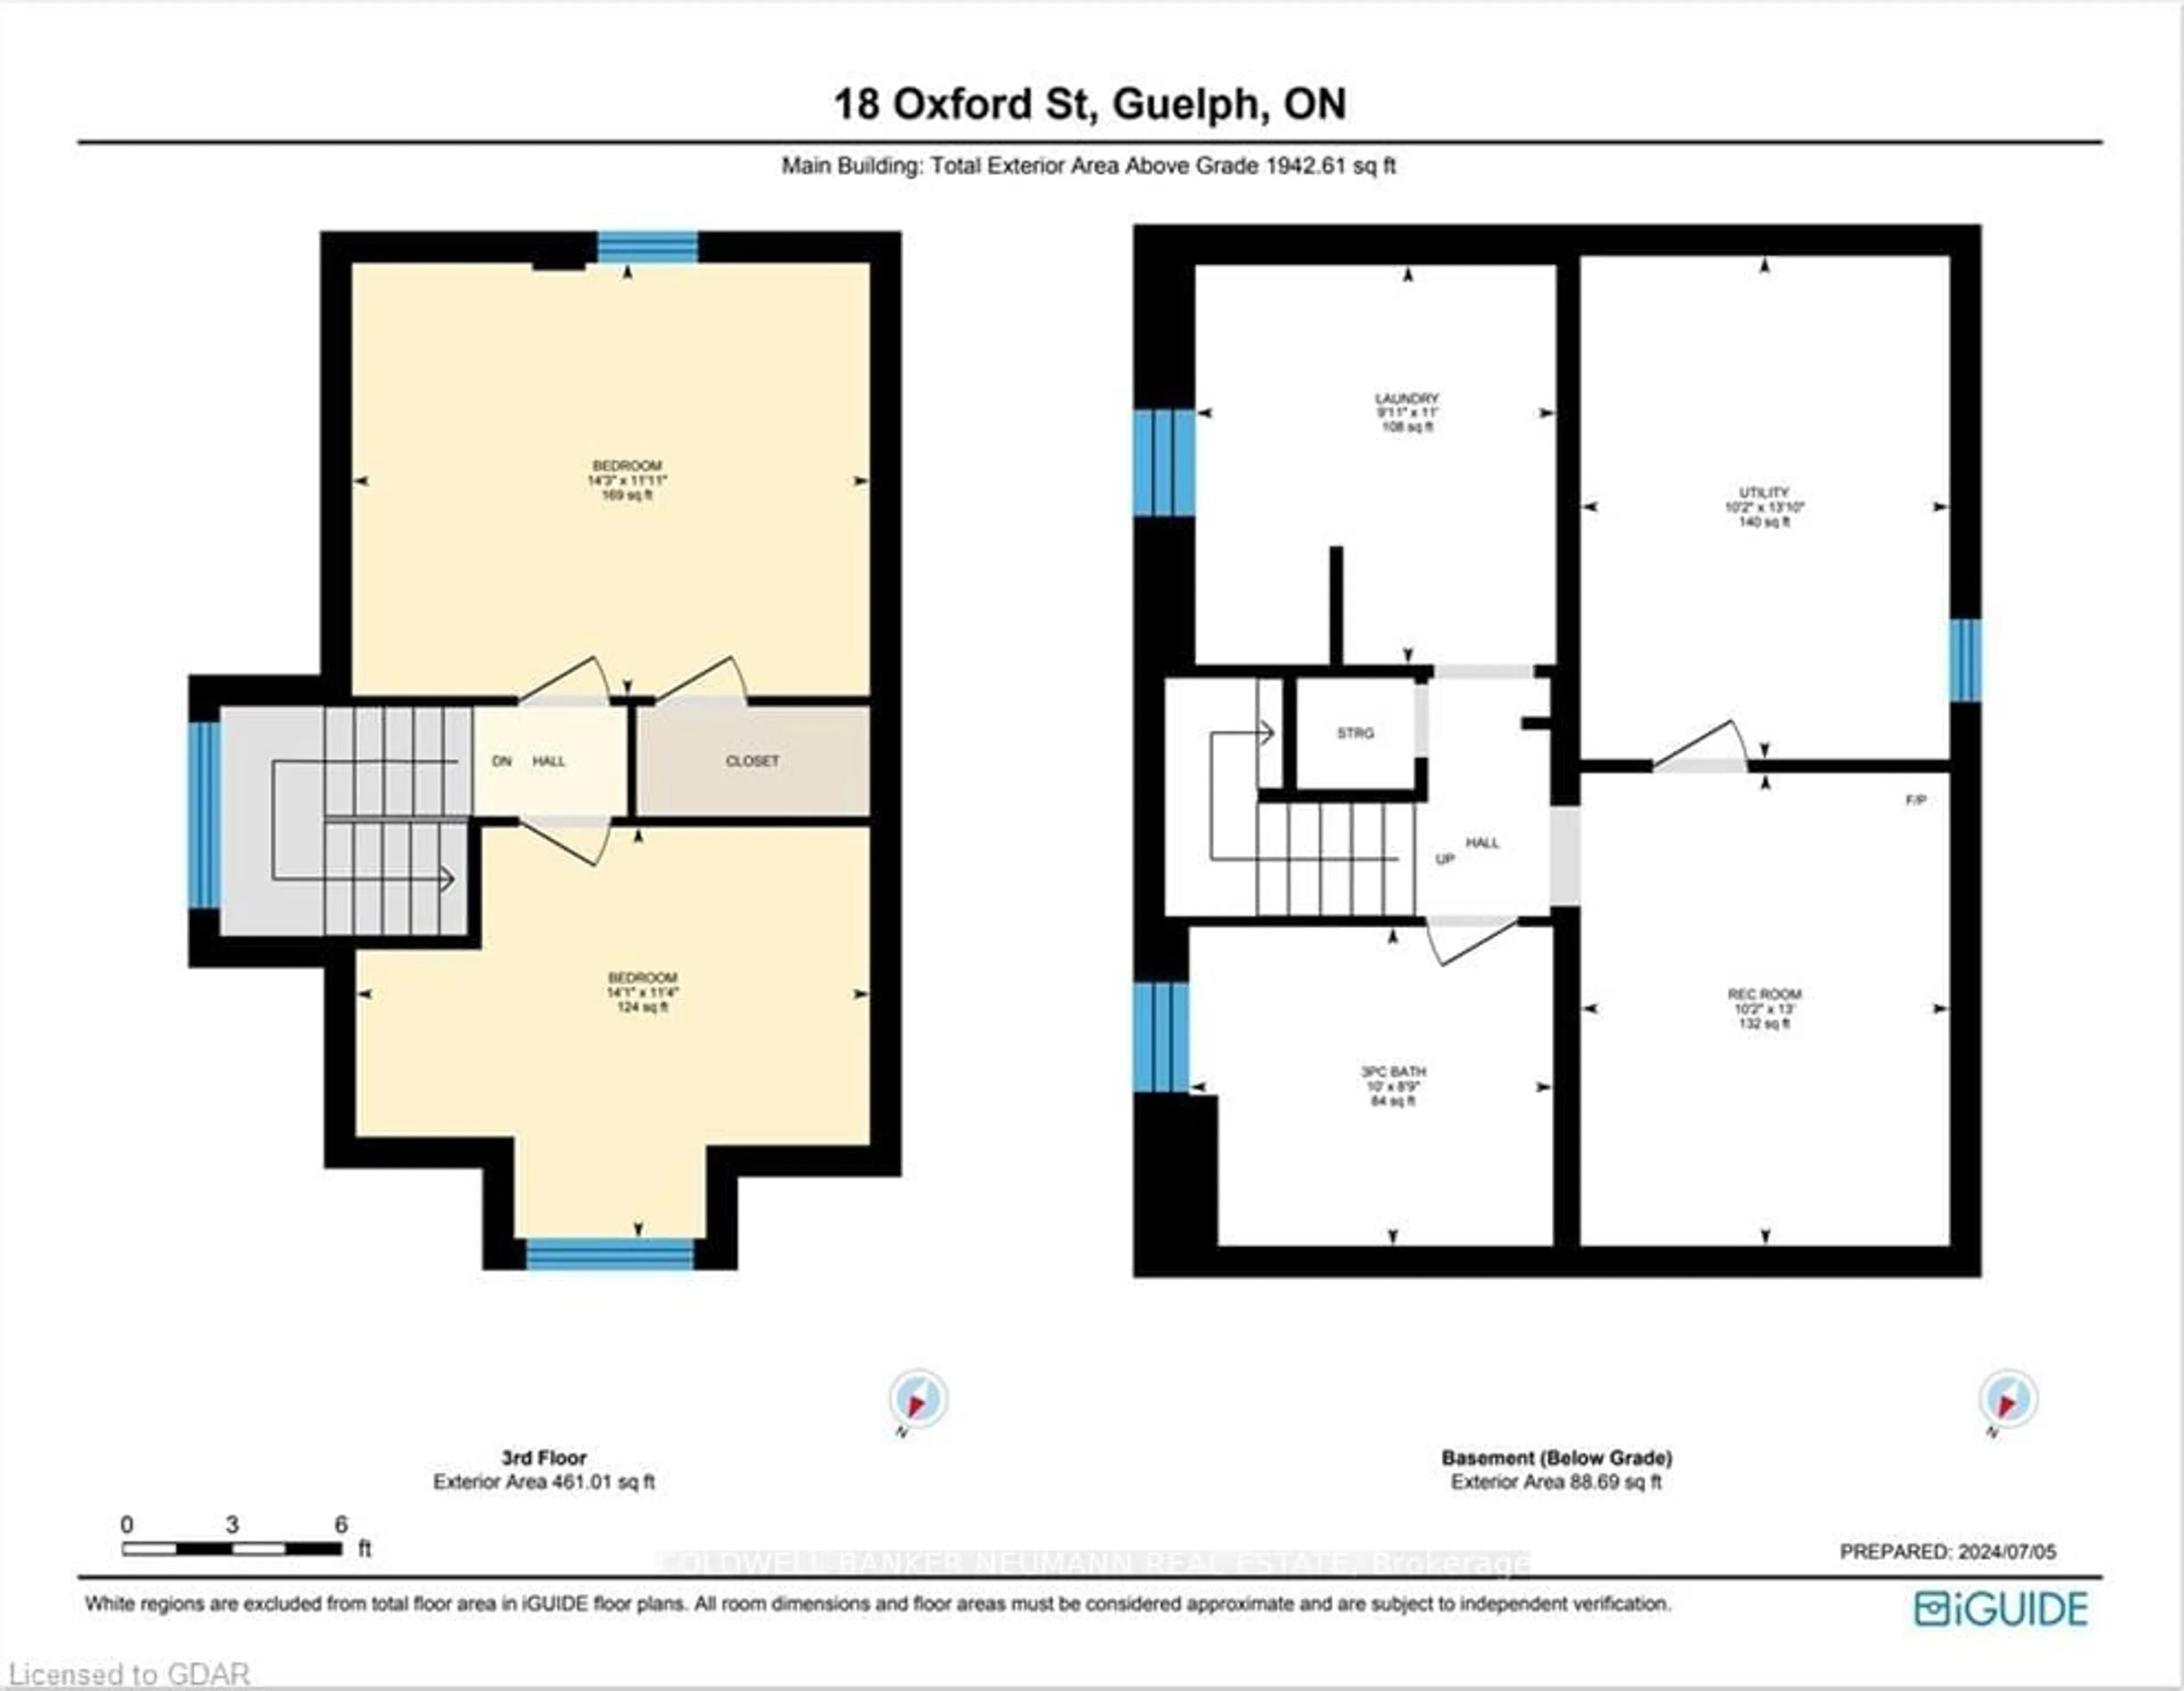 Floor plan for 18 Oxford St, Guelph Ontario N1H 2M3